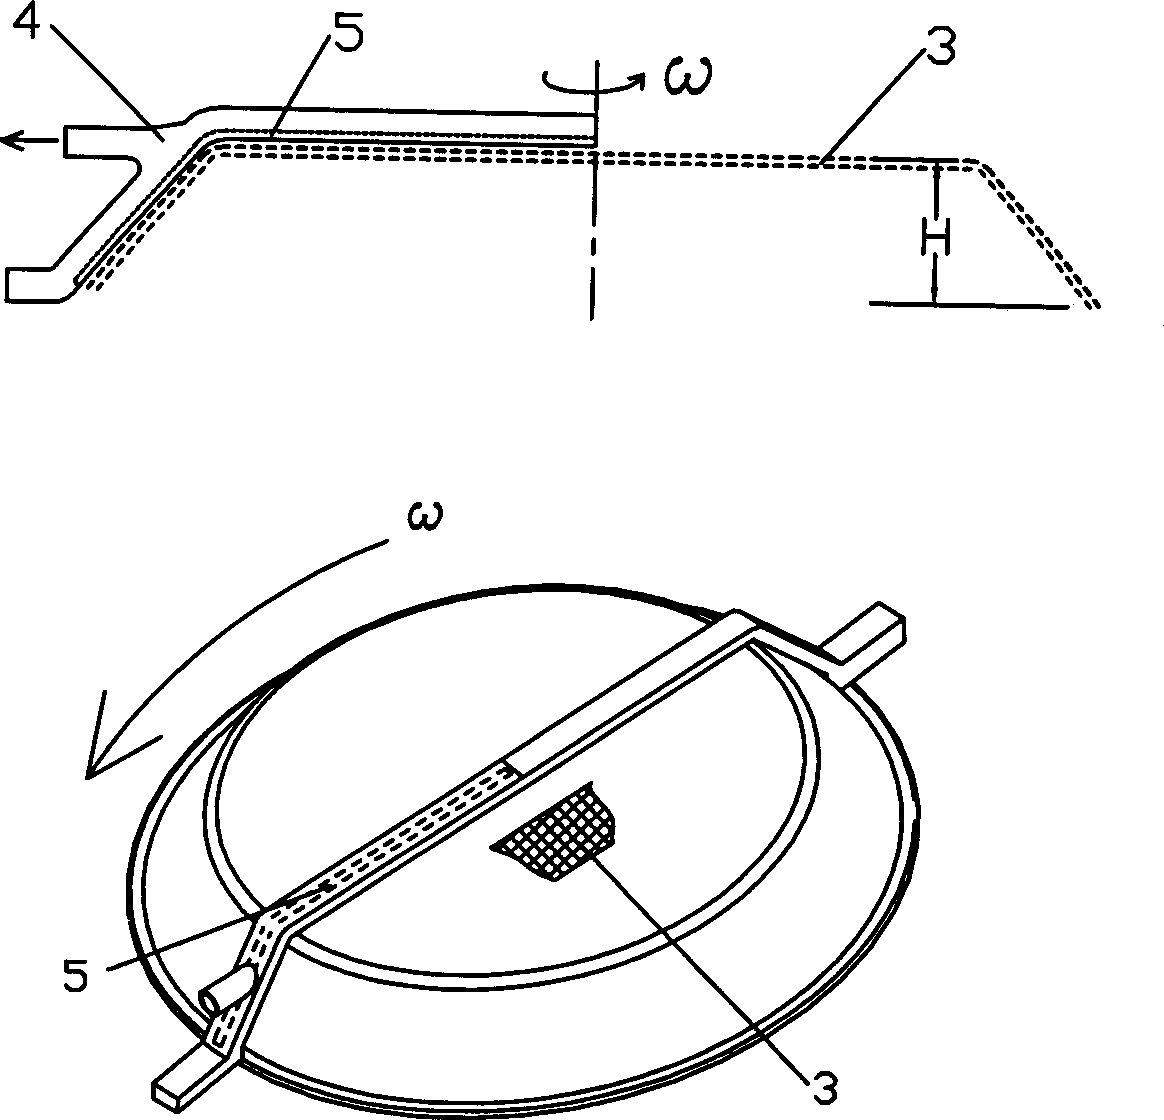 Self-purging unit for filter screen of air conditionner